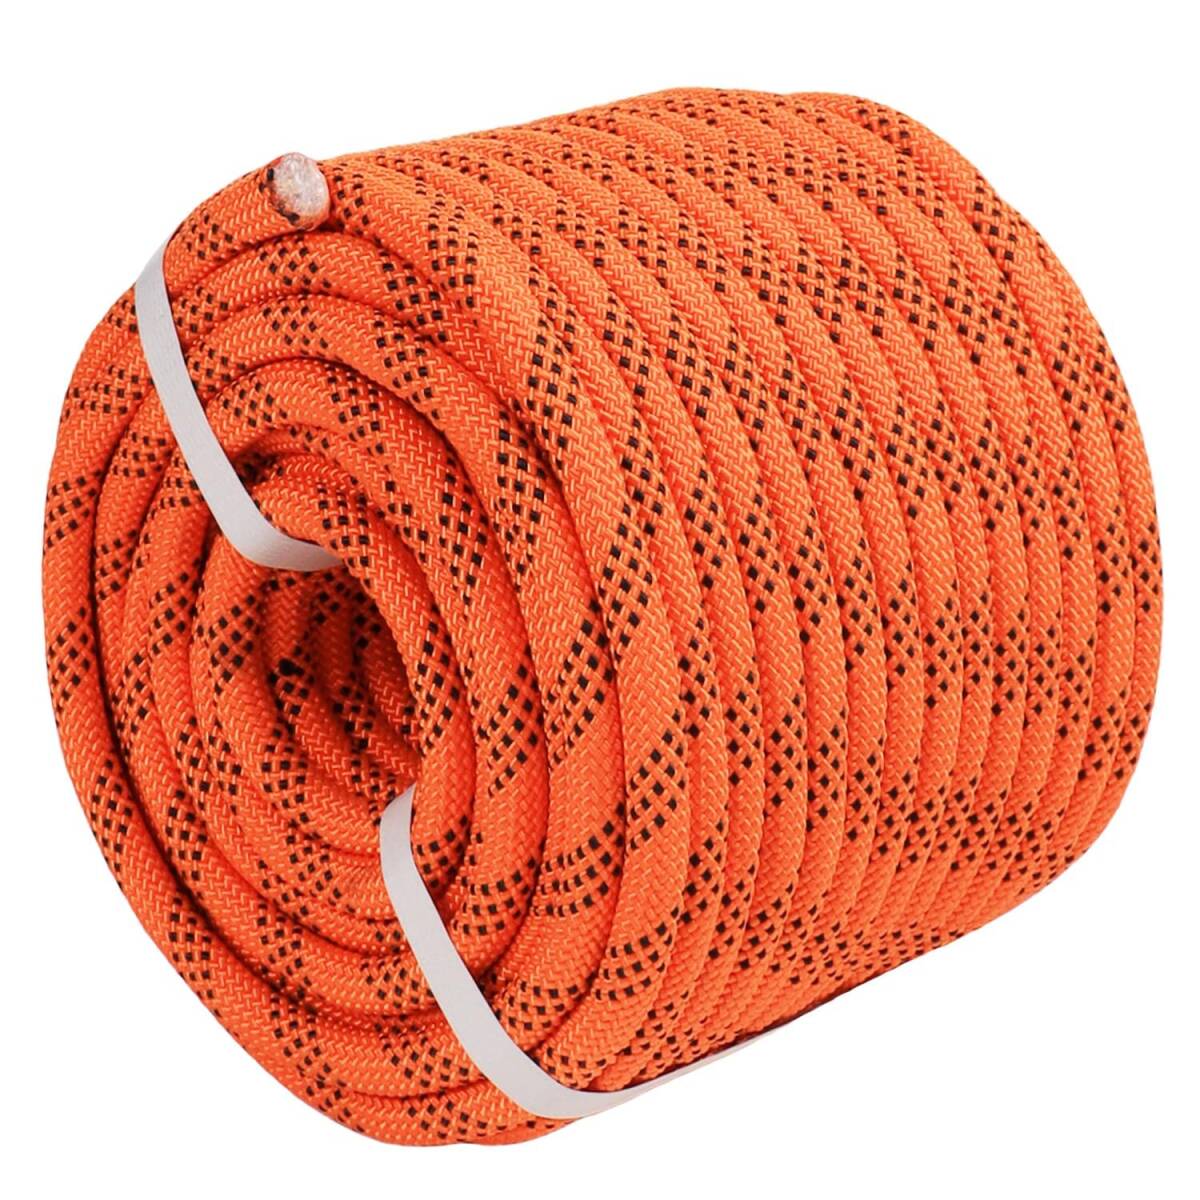 #2516B new goods * length 61m safety rope diameter 1.25cm length 61m mountain climbing rope enduring ... safety rope multifunction high intensity empty middle work multifunction nylon rope 